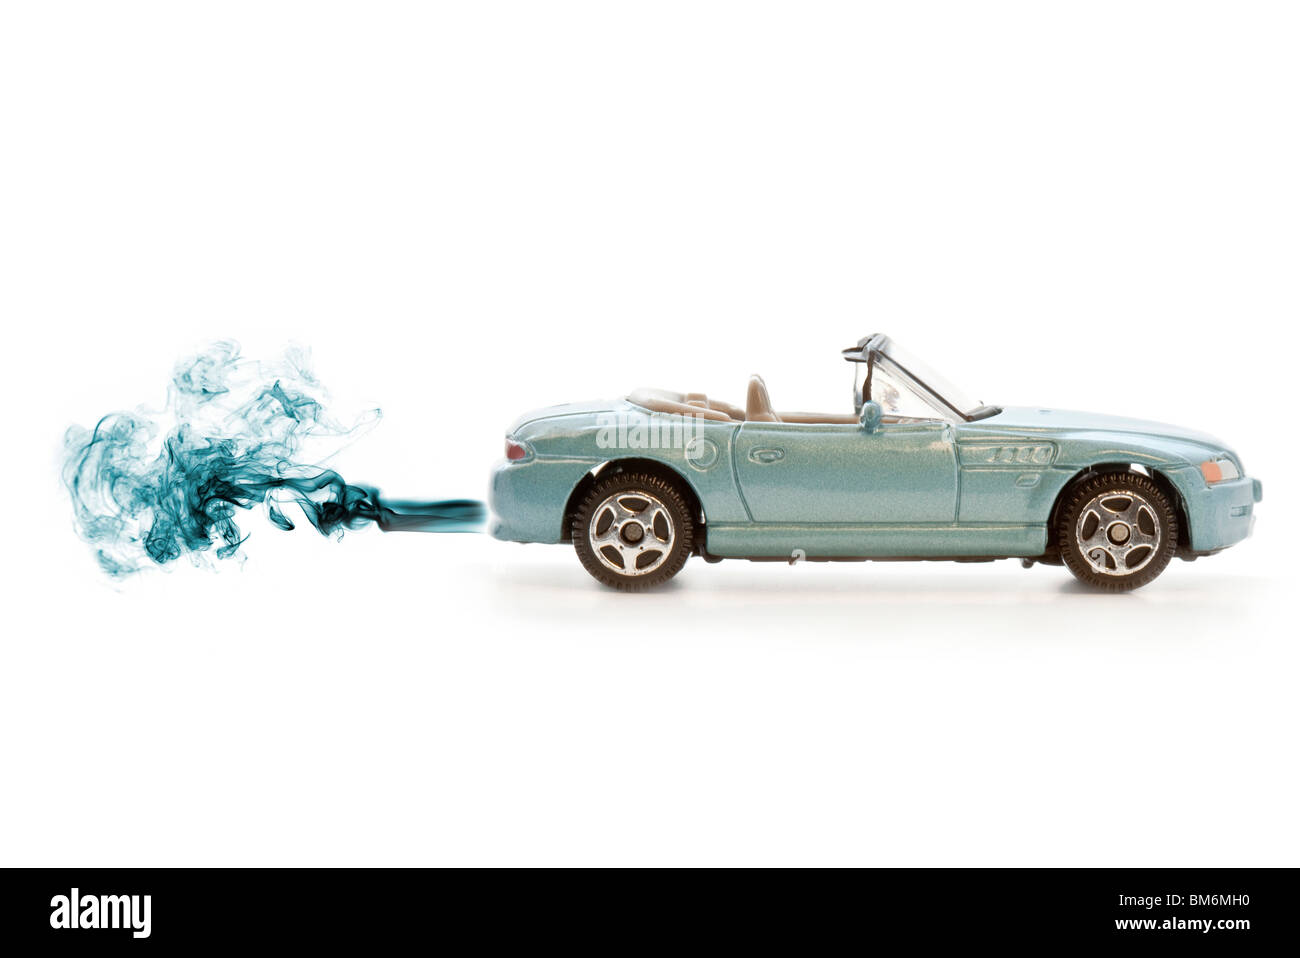 Toy car with smoking exhaust Stock Photo